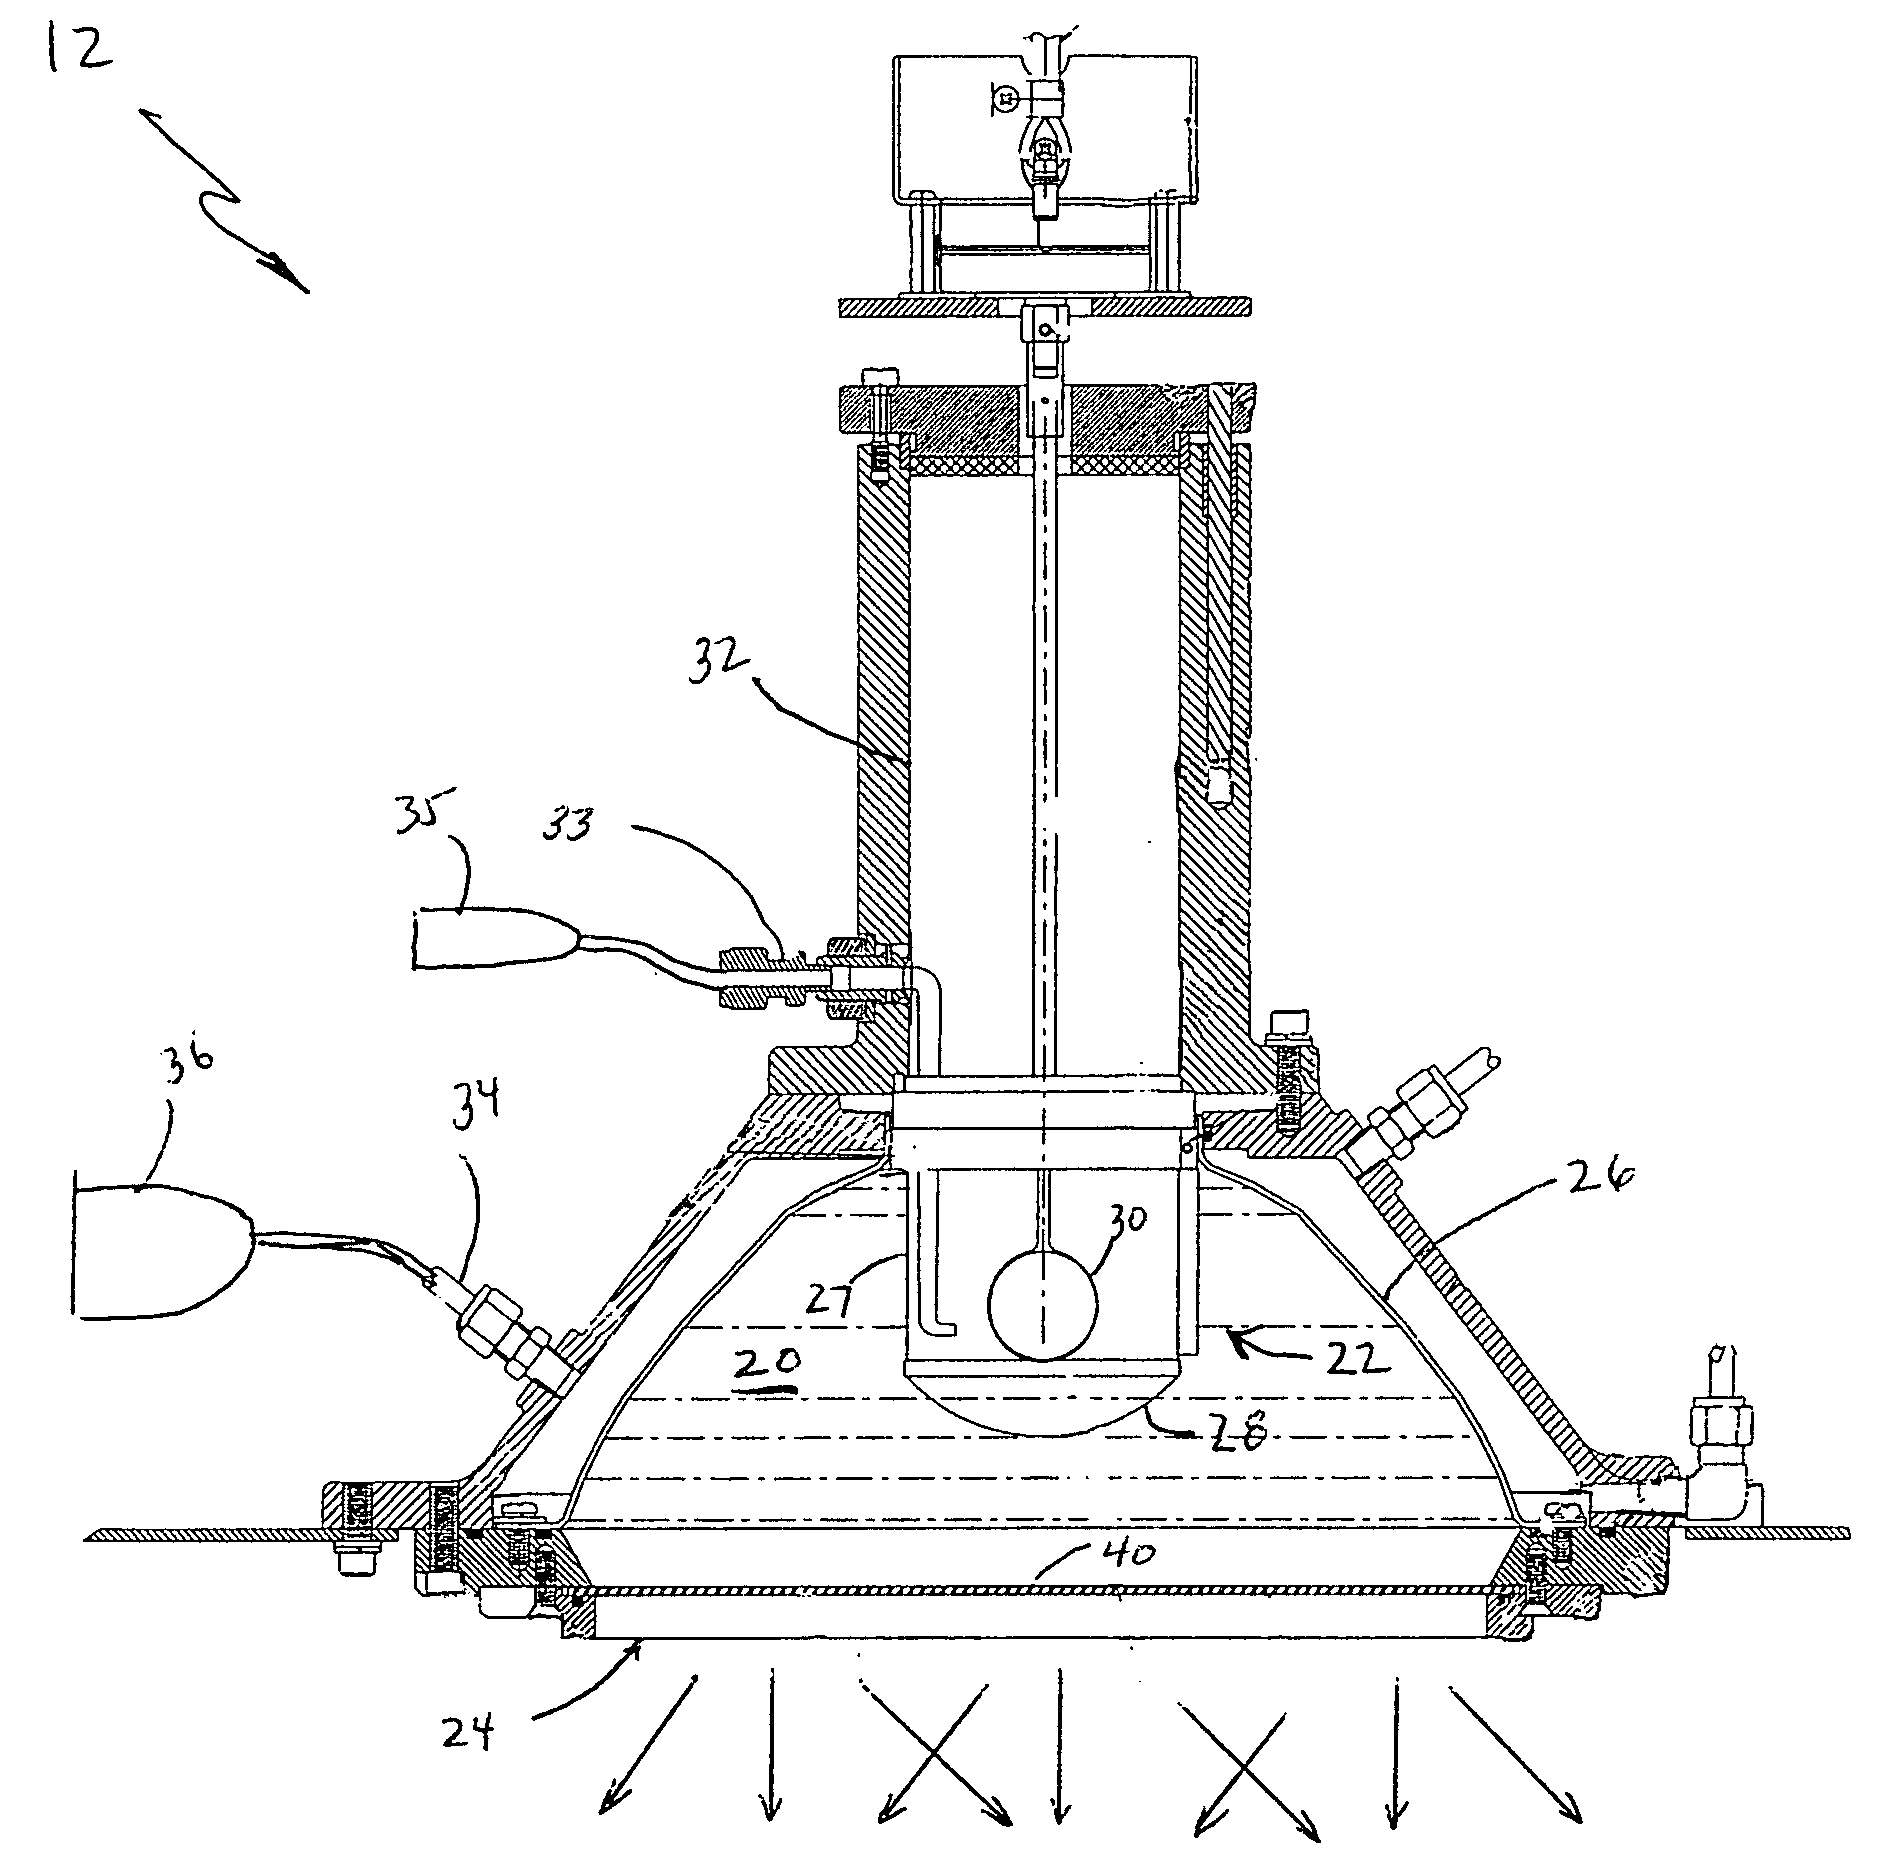 Apparatus and process for treating dielectric materials